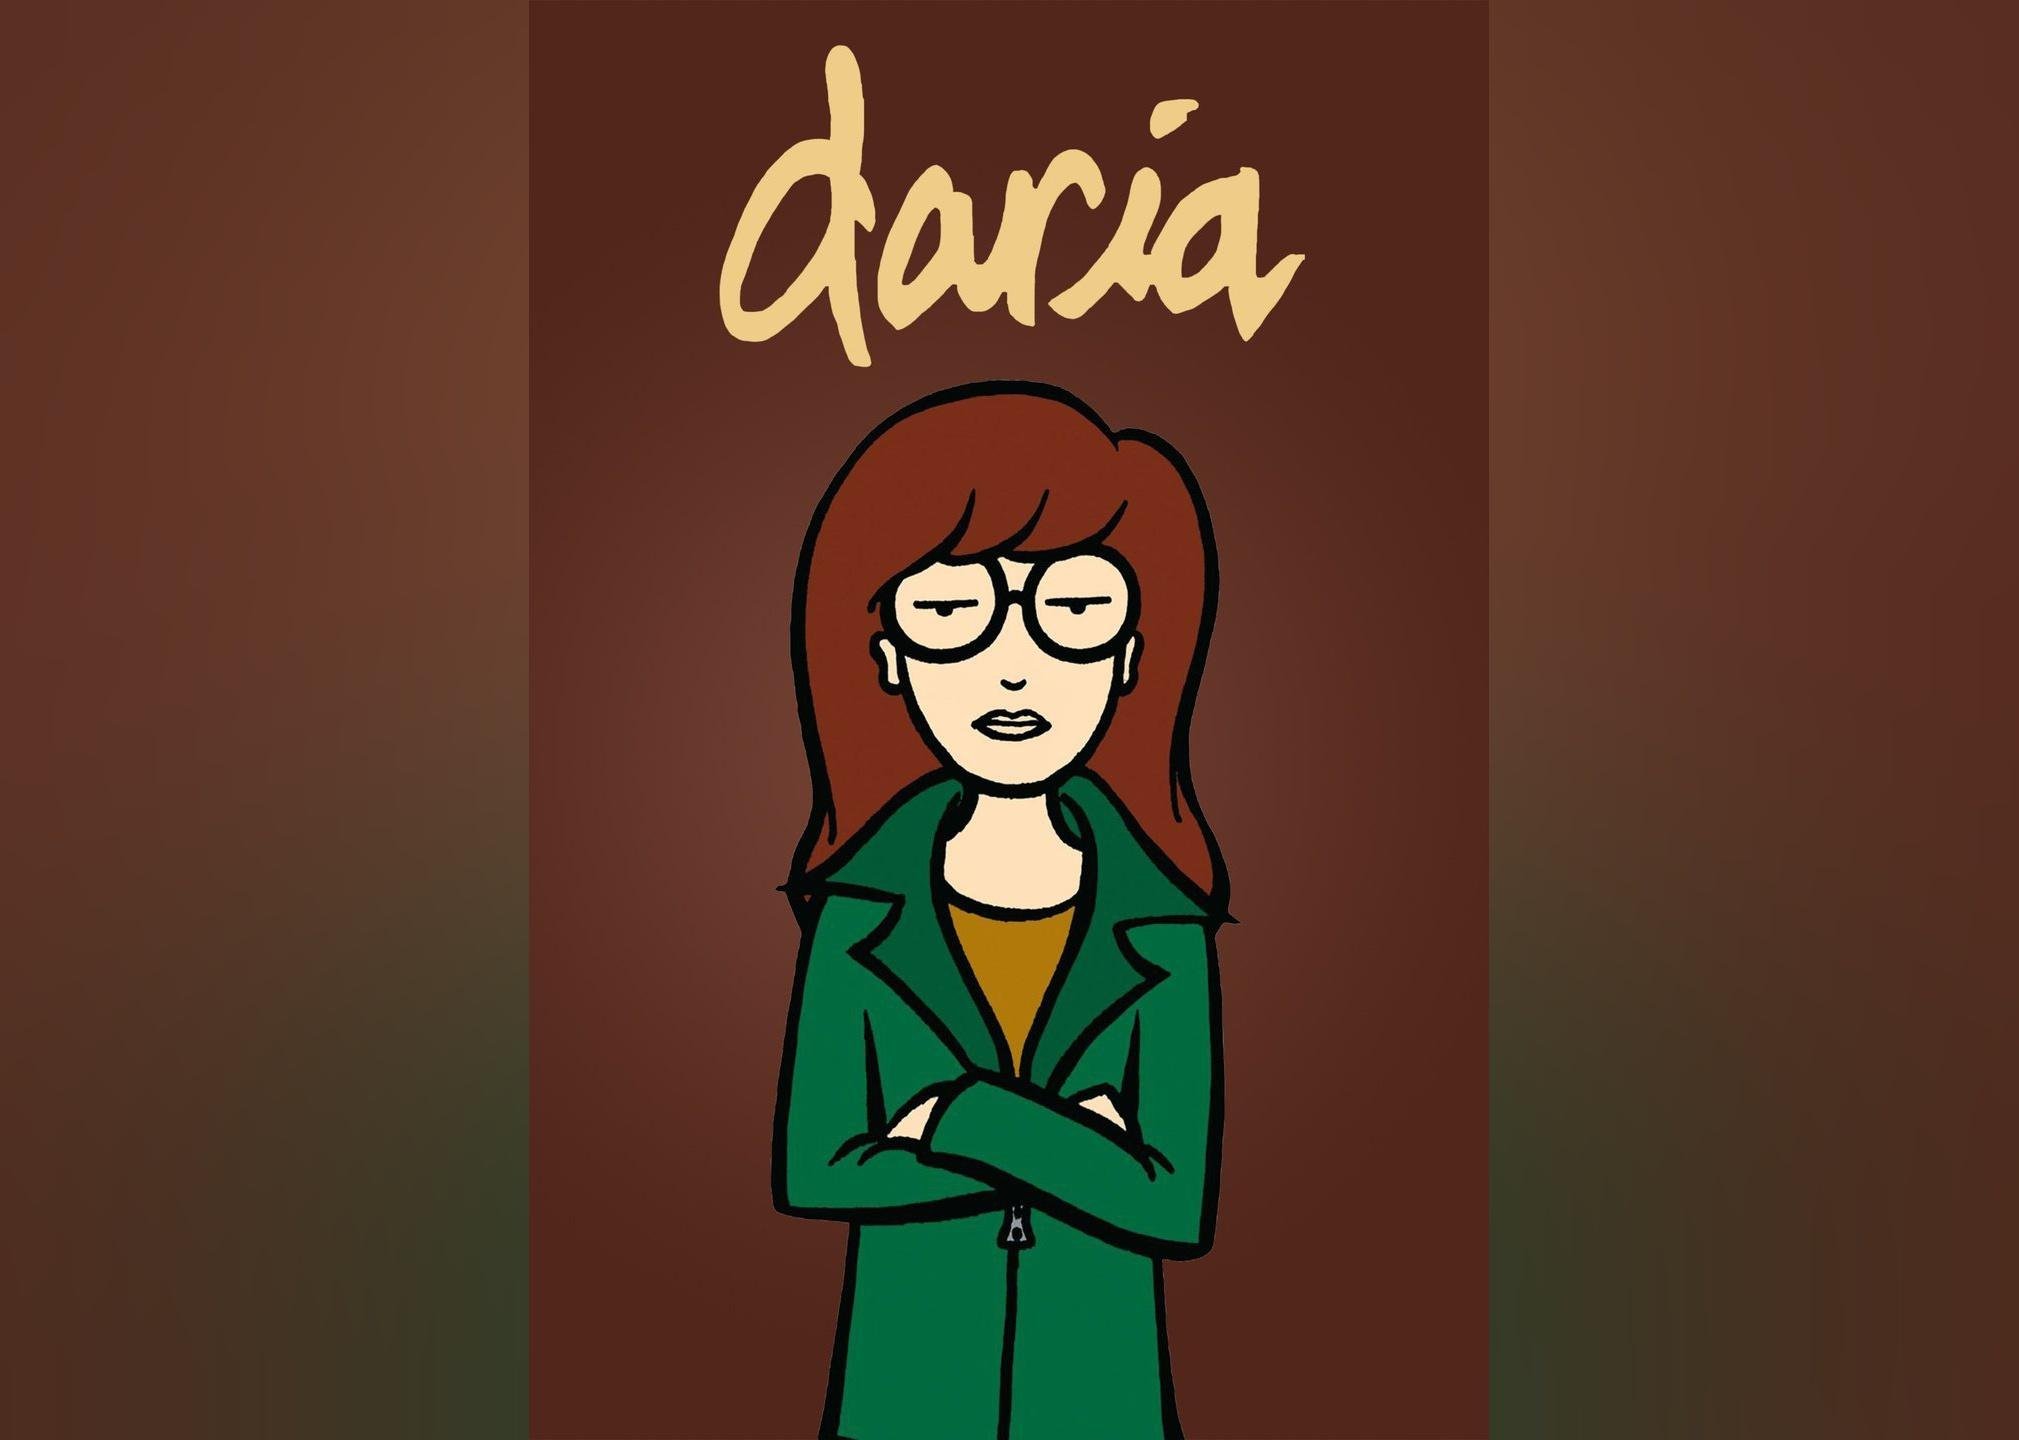 An animation of Daria in a green coat.